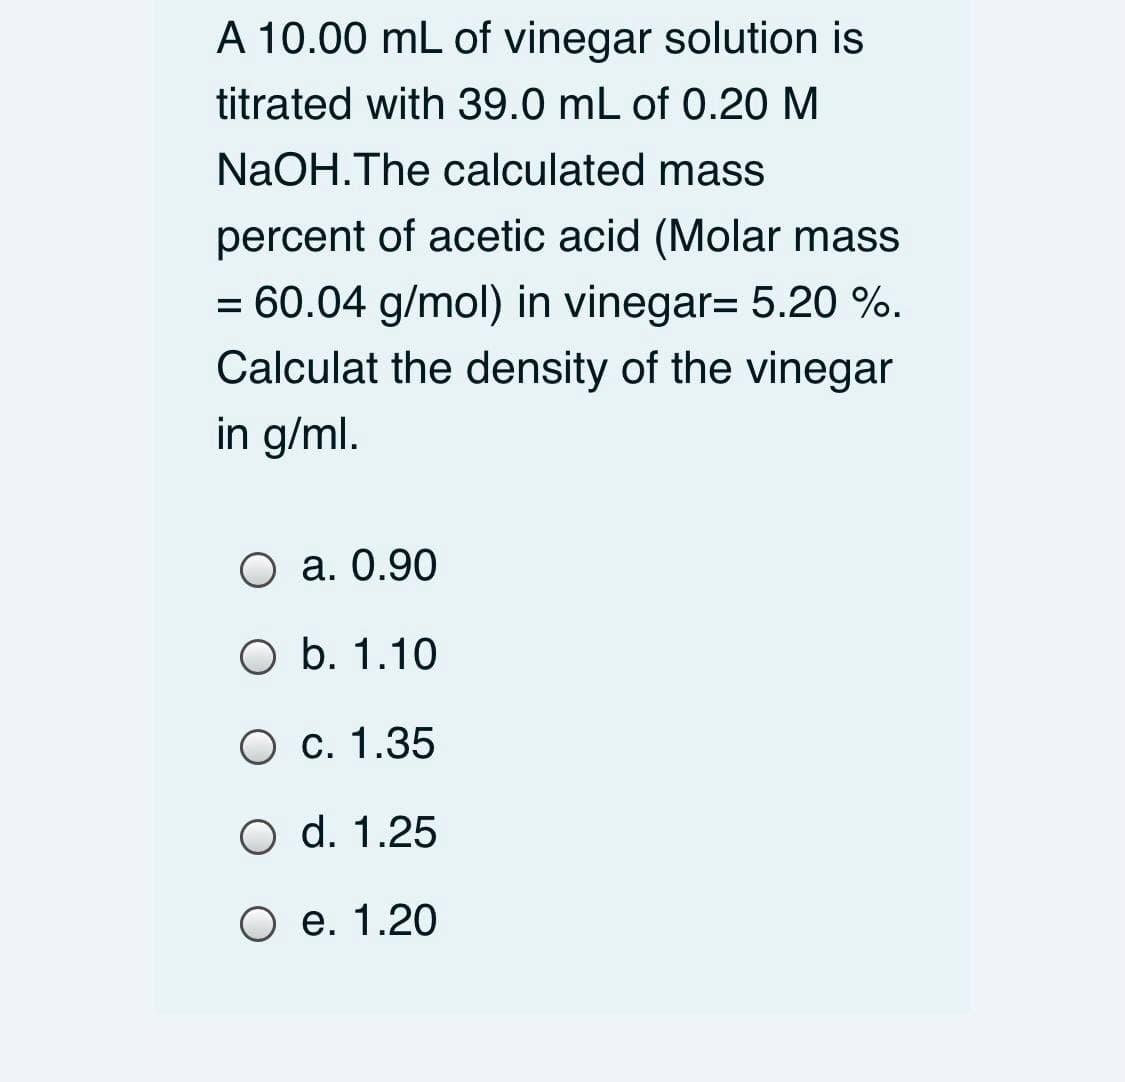 A 10.00 mL of vinegar solution is
titrated with 39.0 mL of 0.20 M
NaOH.The calculated mass
percent of acetic acid (Molar mass
= 60.04 g/mol) in vinegar= 5.20 %.
Calculat the density of the vinegar
in g/ml.
O a. 0.90
O b. 1.10
О с. 1.35
O d. 1.25
О е. 1.20
